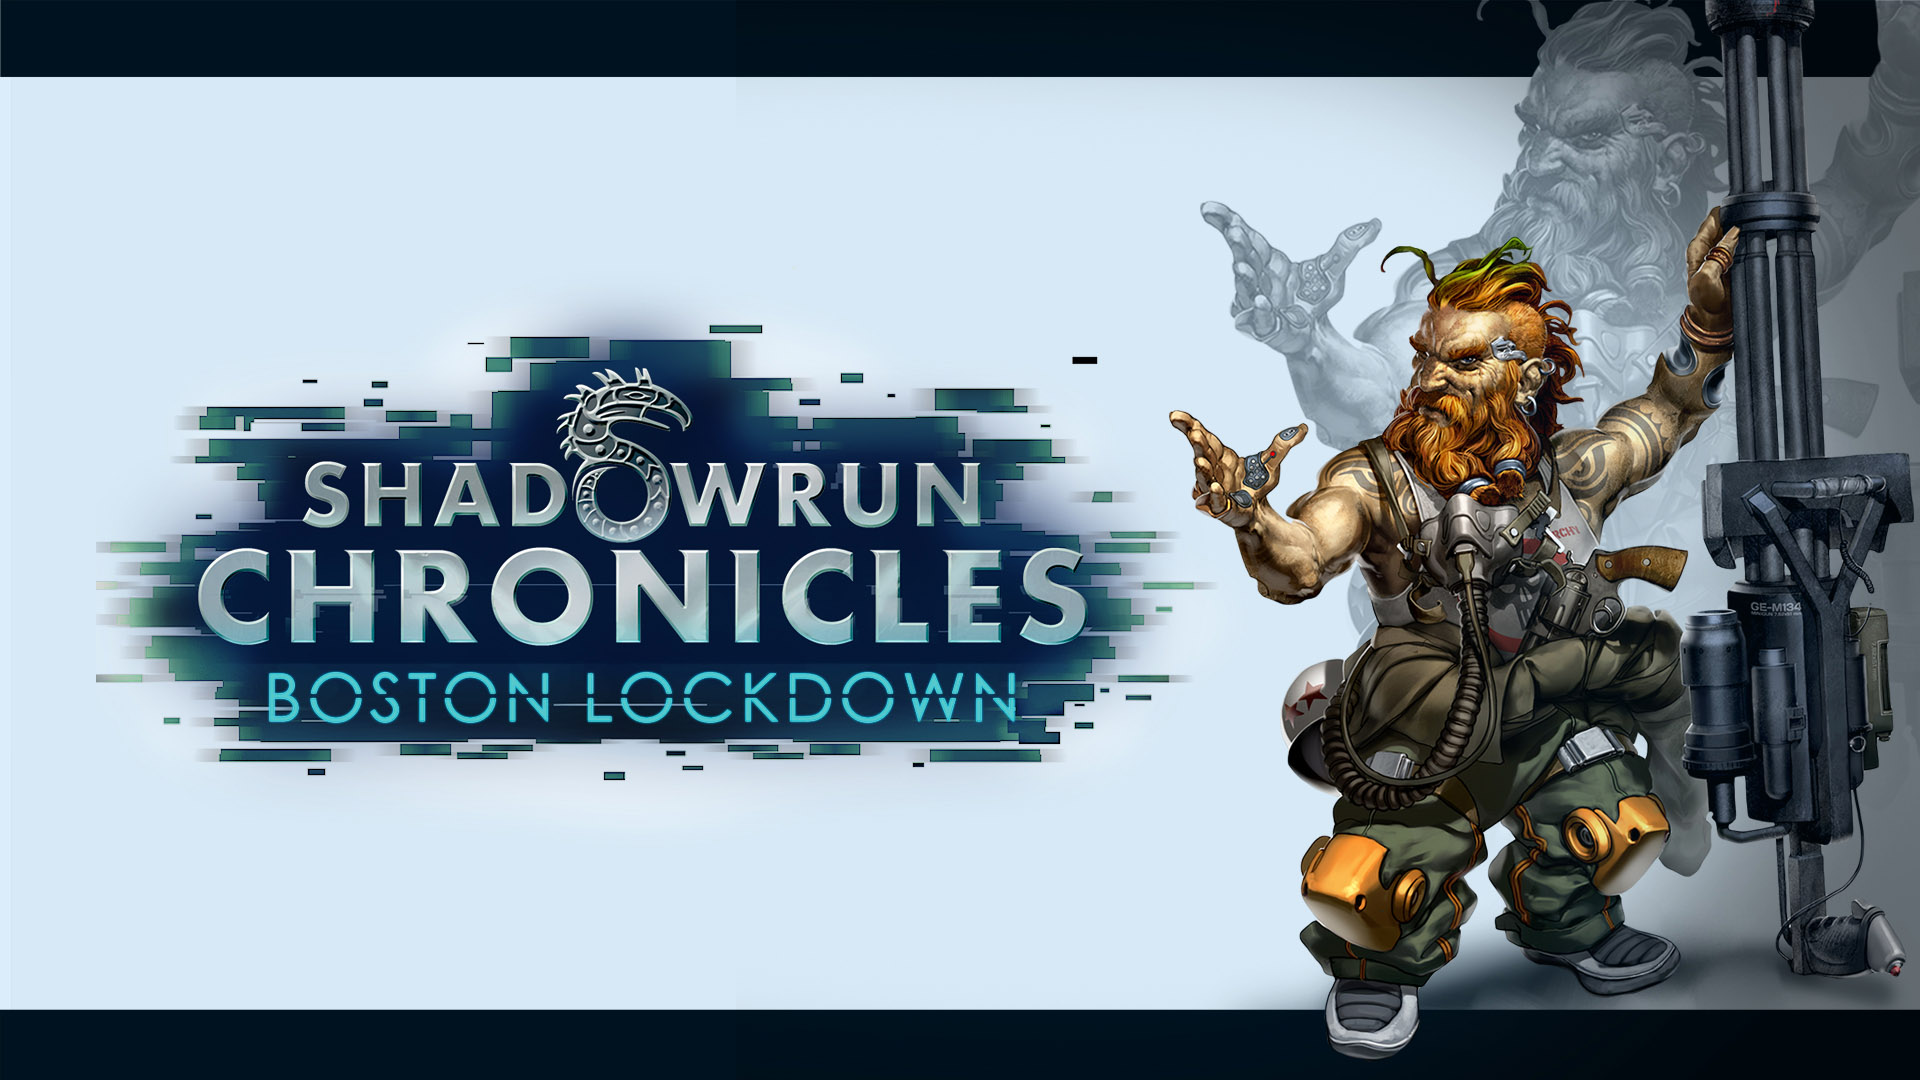 Shadowrun Chronicles Backgrounds, Compatible - PC, Mobile, Gadgets| 1920x1080 px